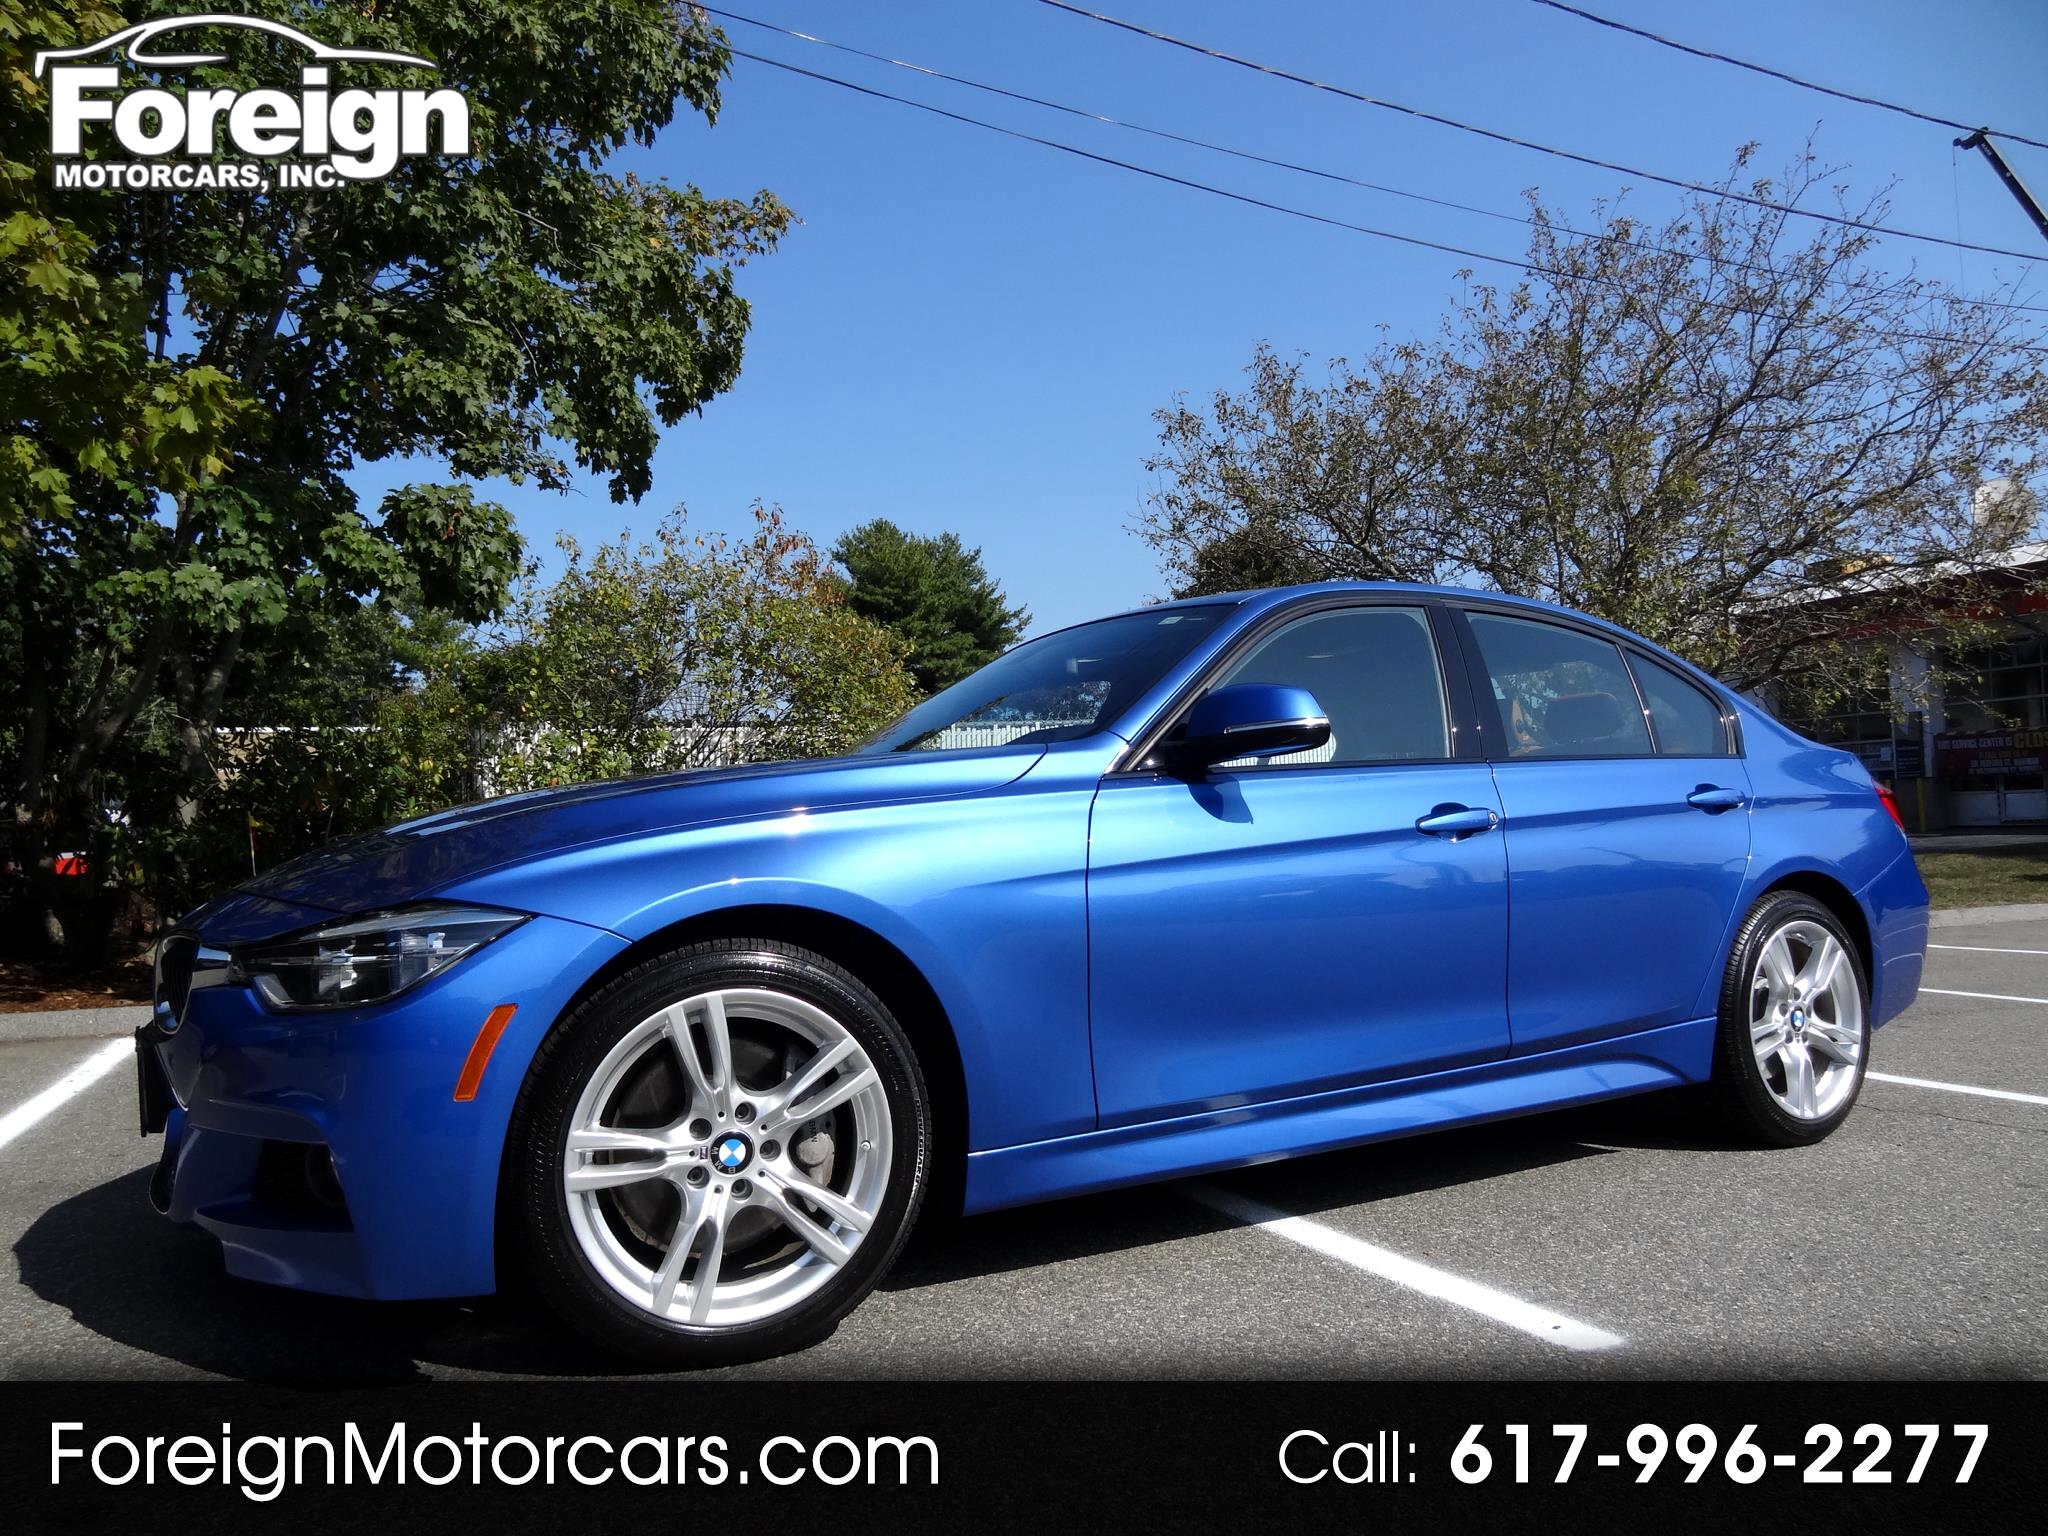 Used 2016 Bmw 3 Series Sold In Quincy Ma 02169 Foreign Motorcars Inc